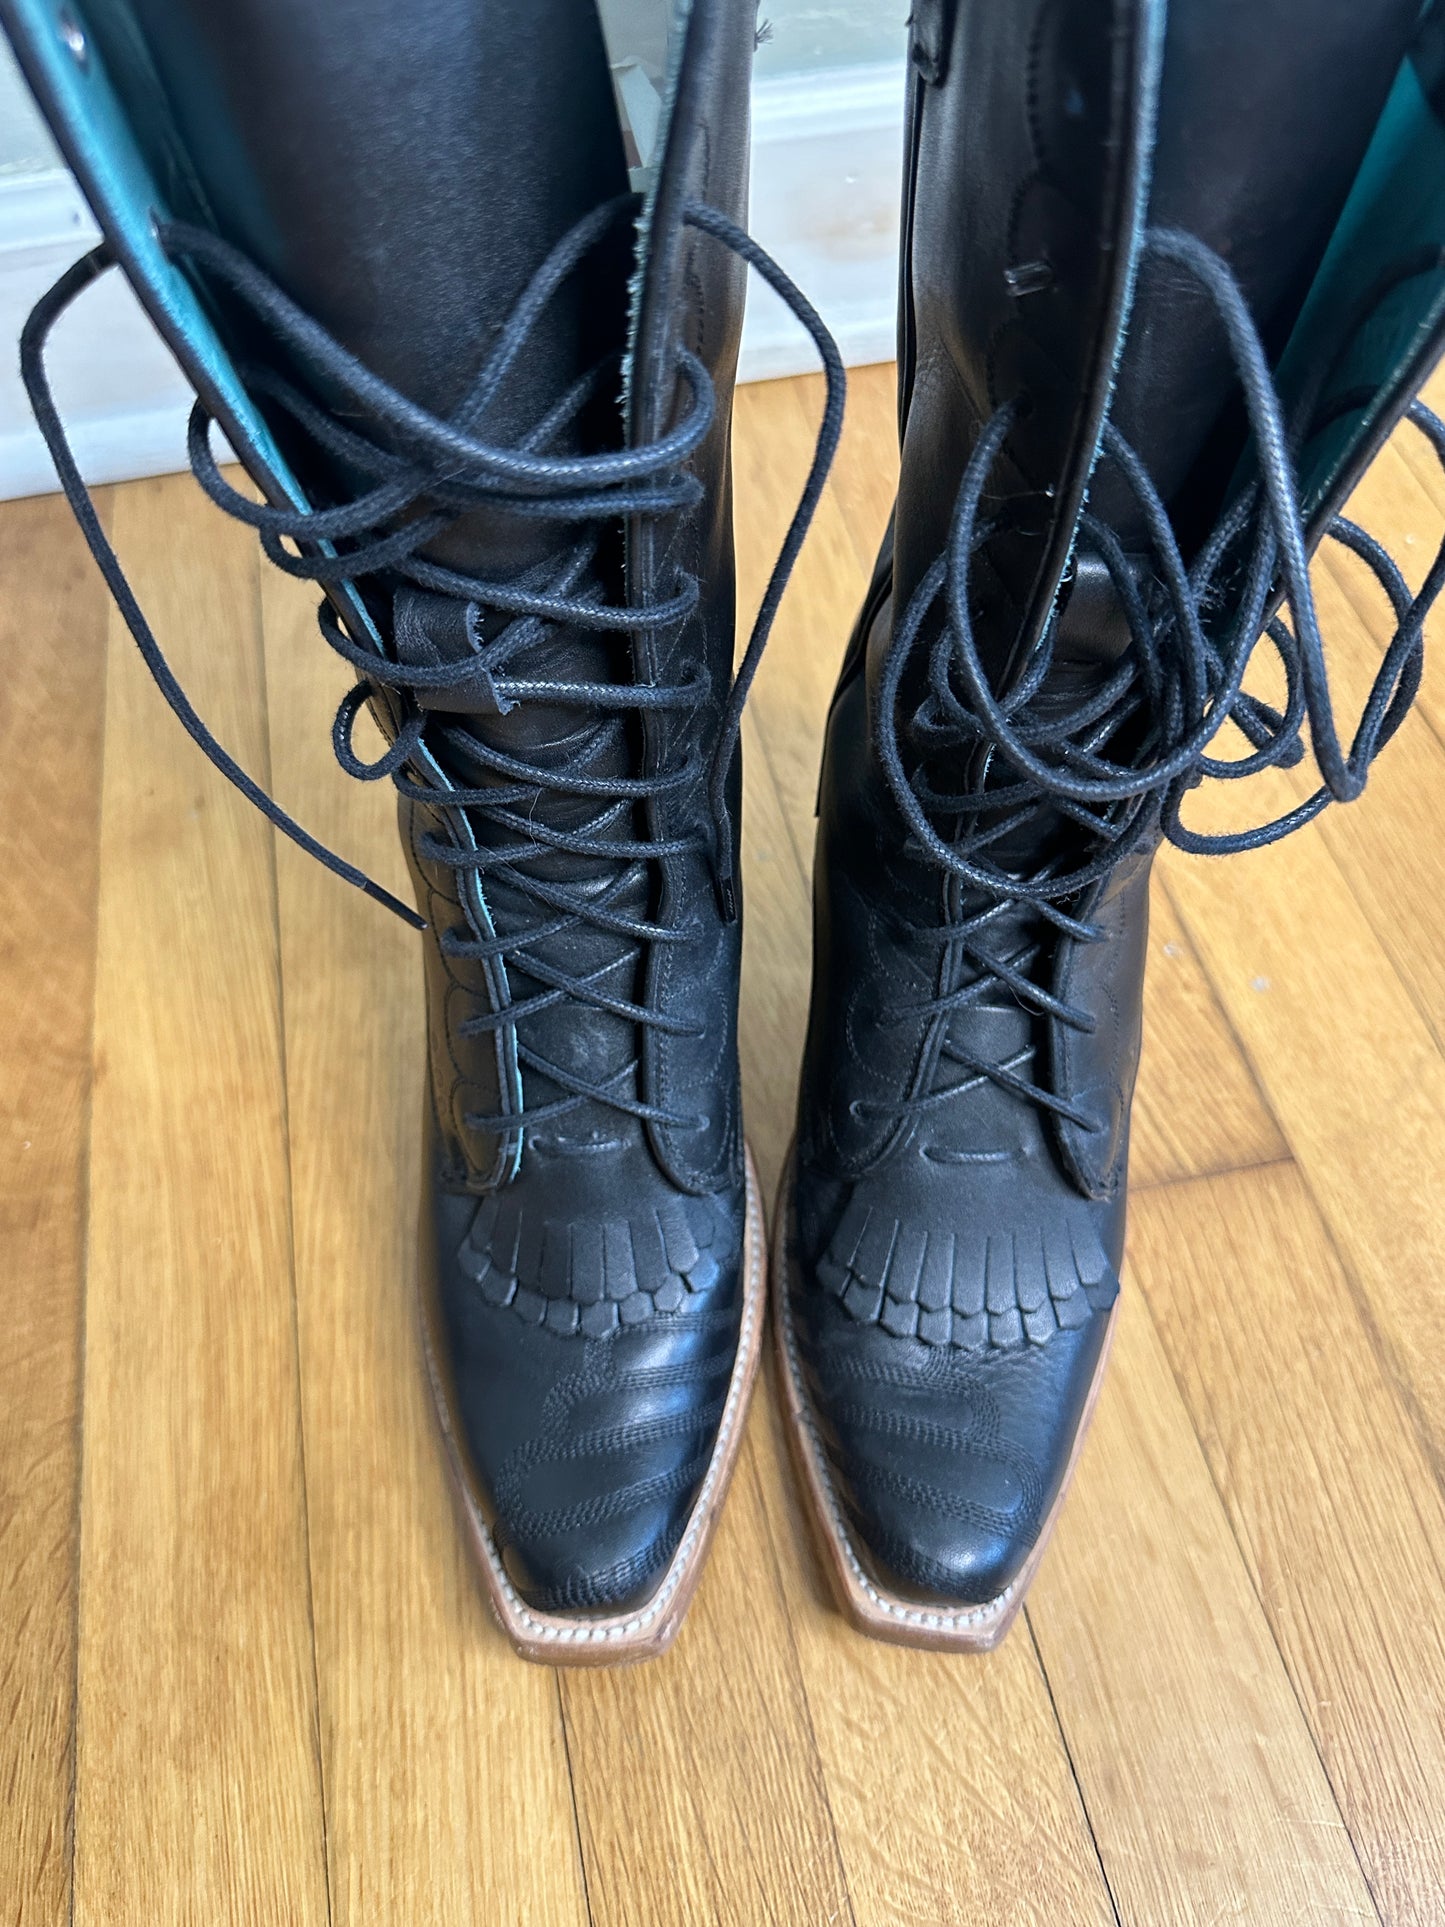 PS Kaufman Crescent Lace Up Boot 8.5